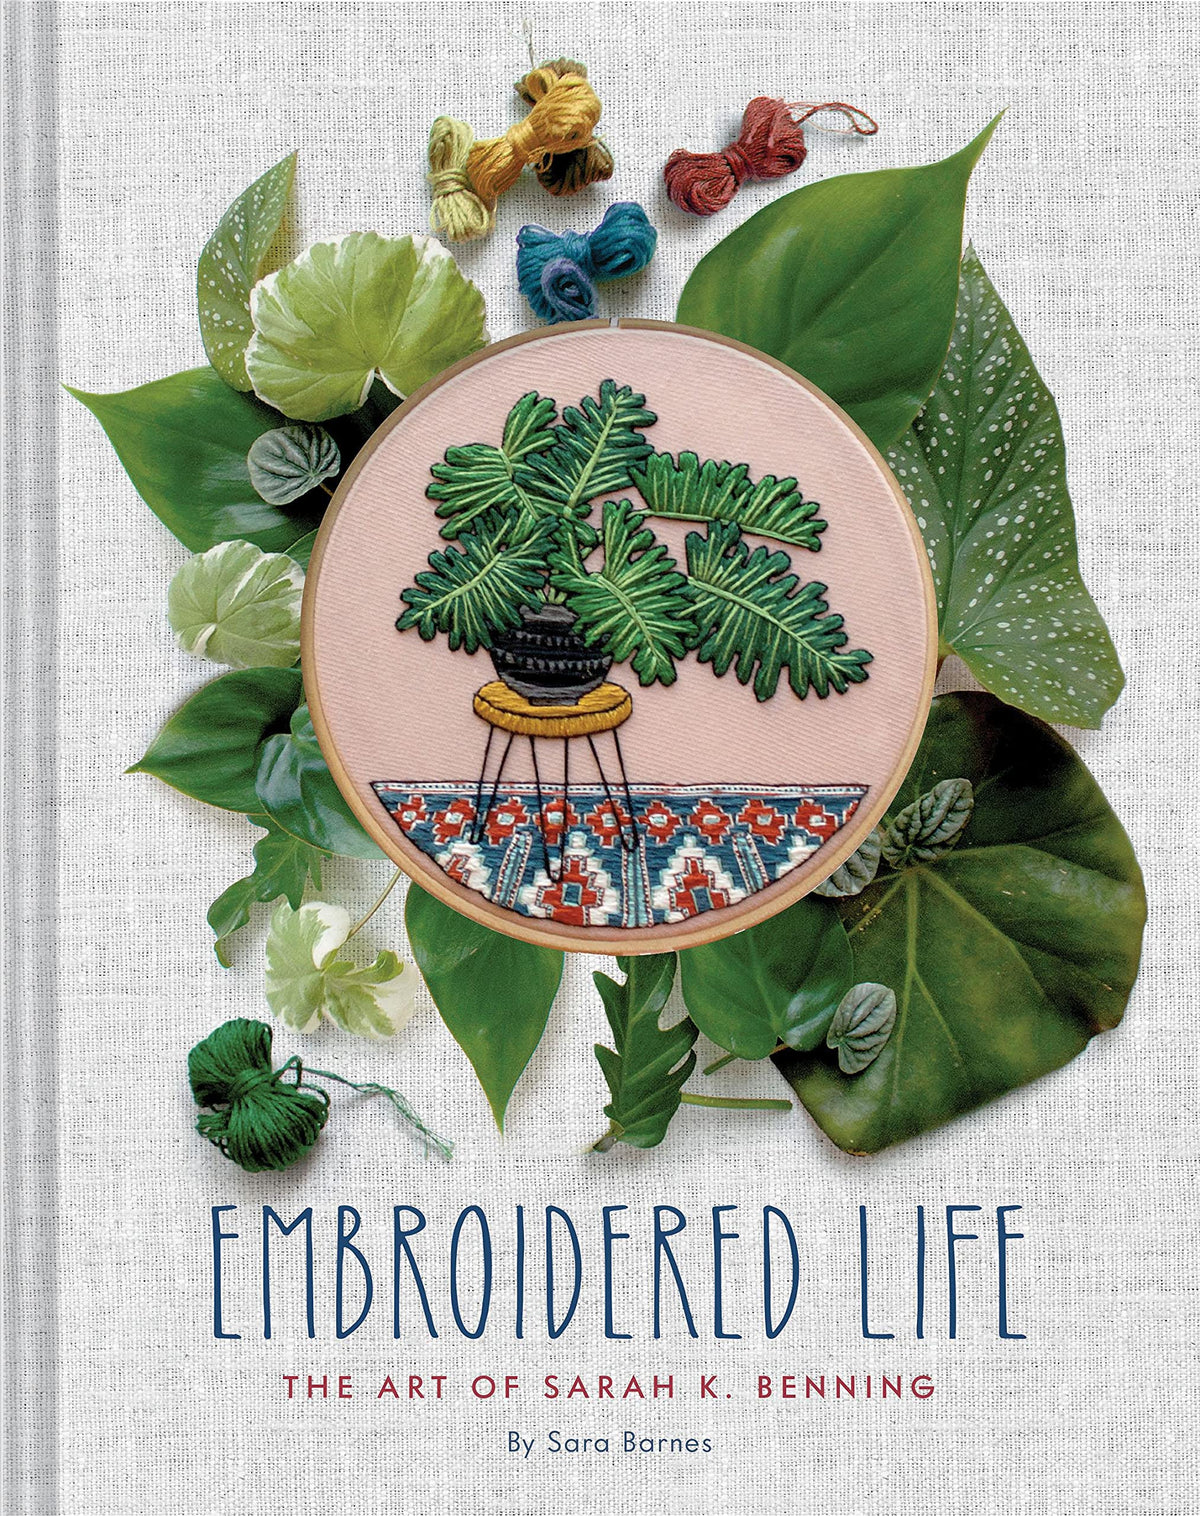 Embroidered Life: The Art of Sarah K. Benning by Sara Barnes